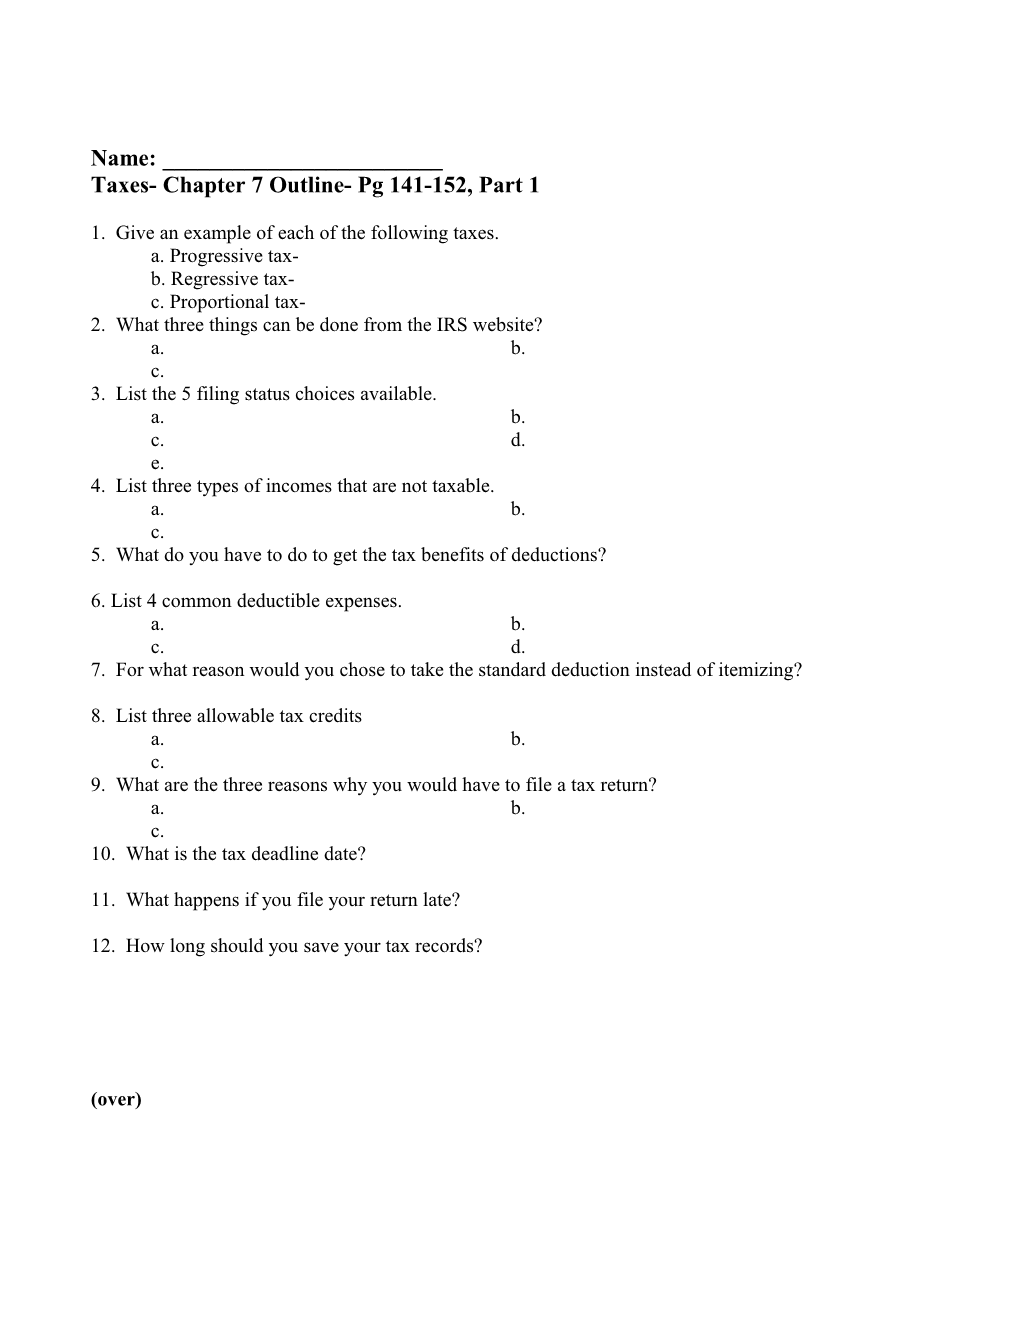 Taxes- Chapter 7 Outline- Pg 141-152, Part 1